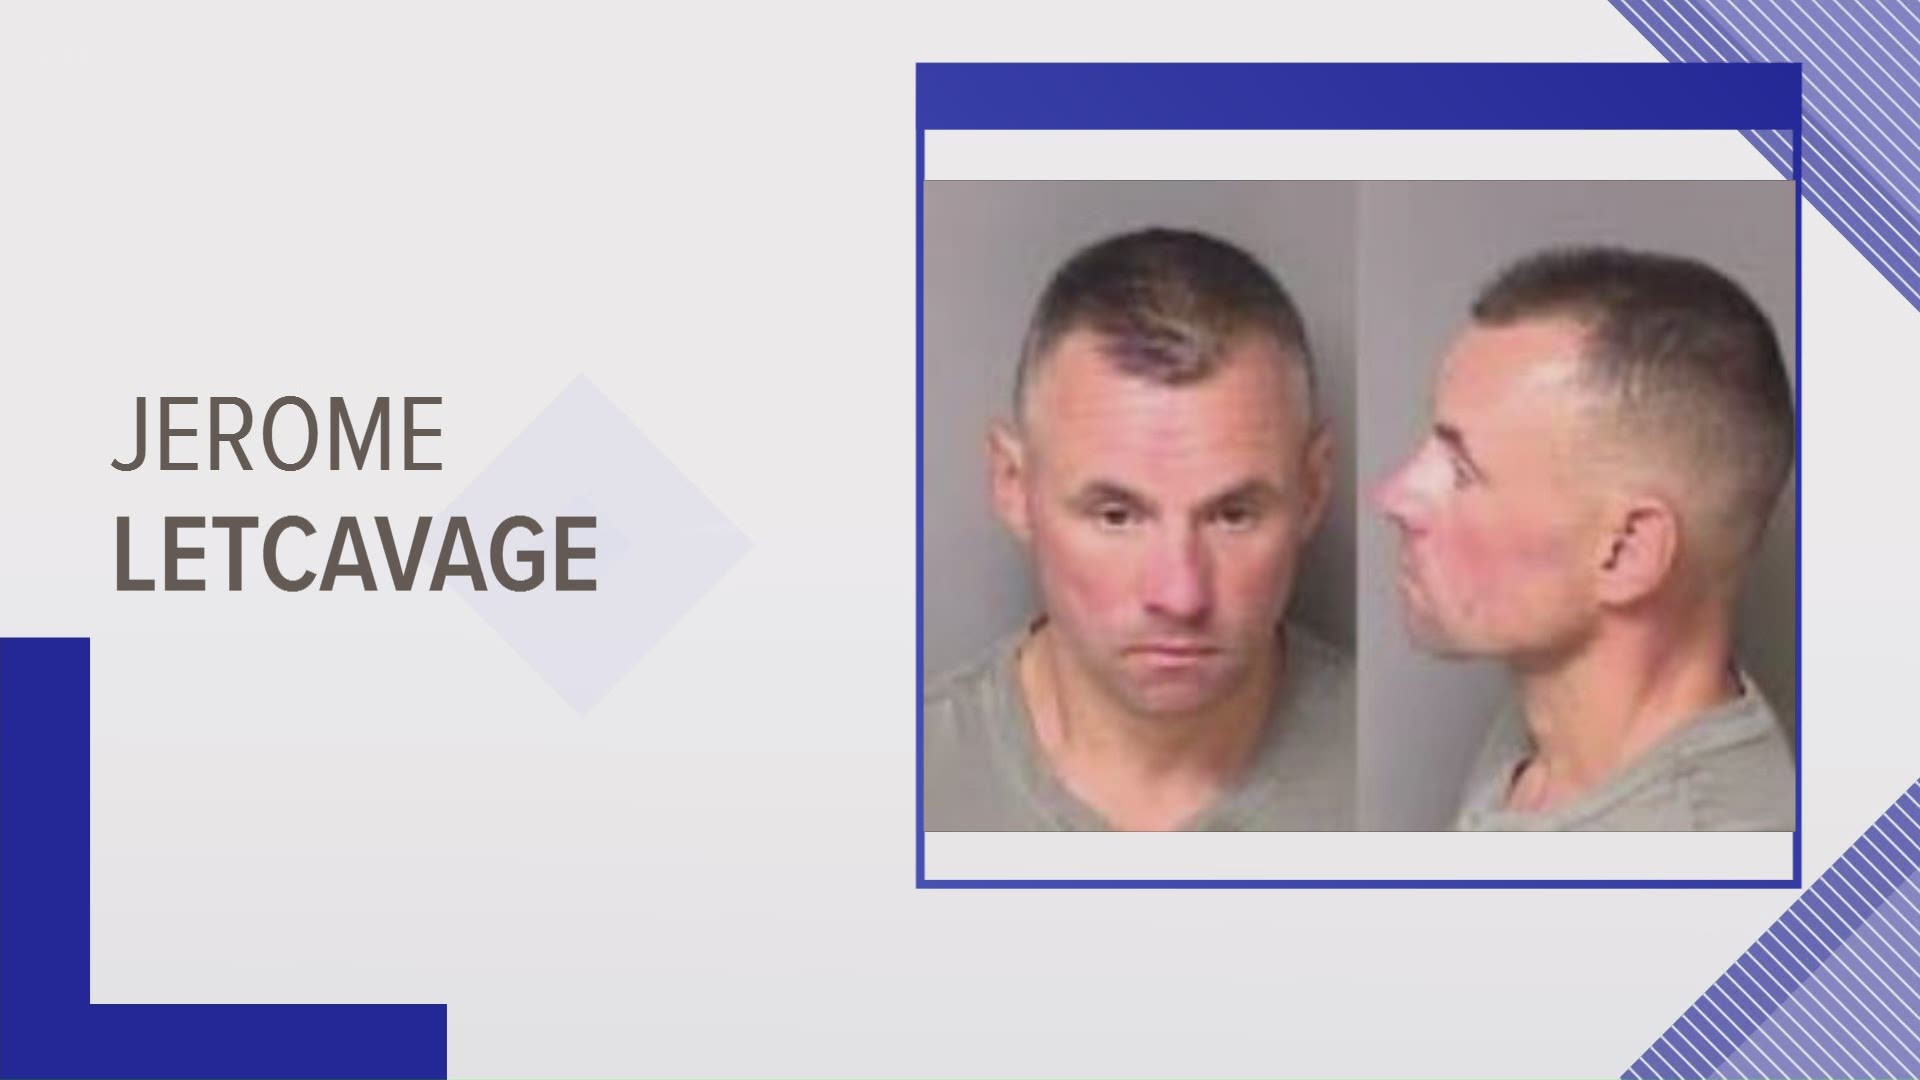 44-year-old Jerome Letcavage has been taken into custody in Gastonia.